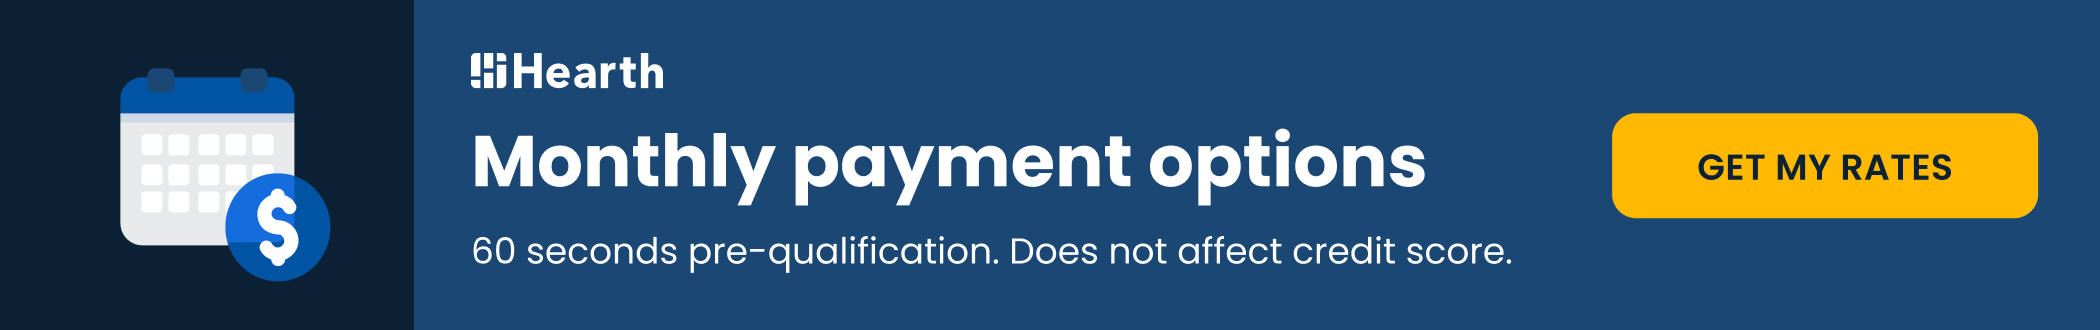 monthly-payment-options